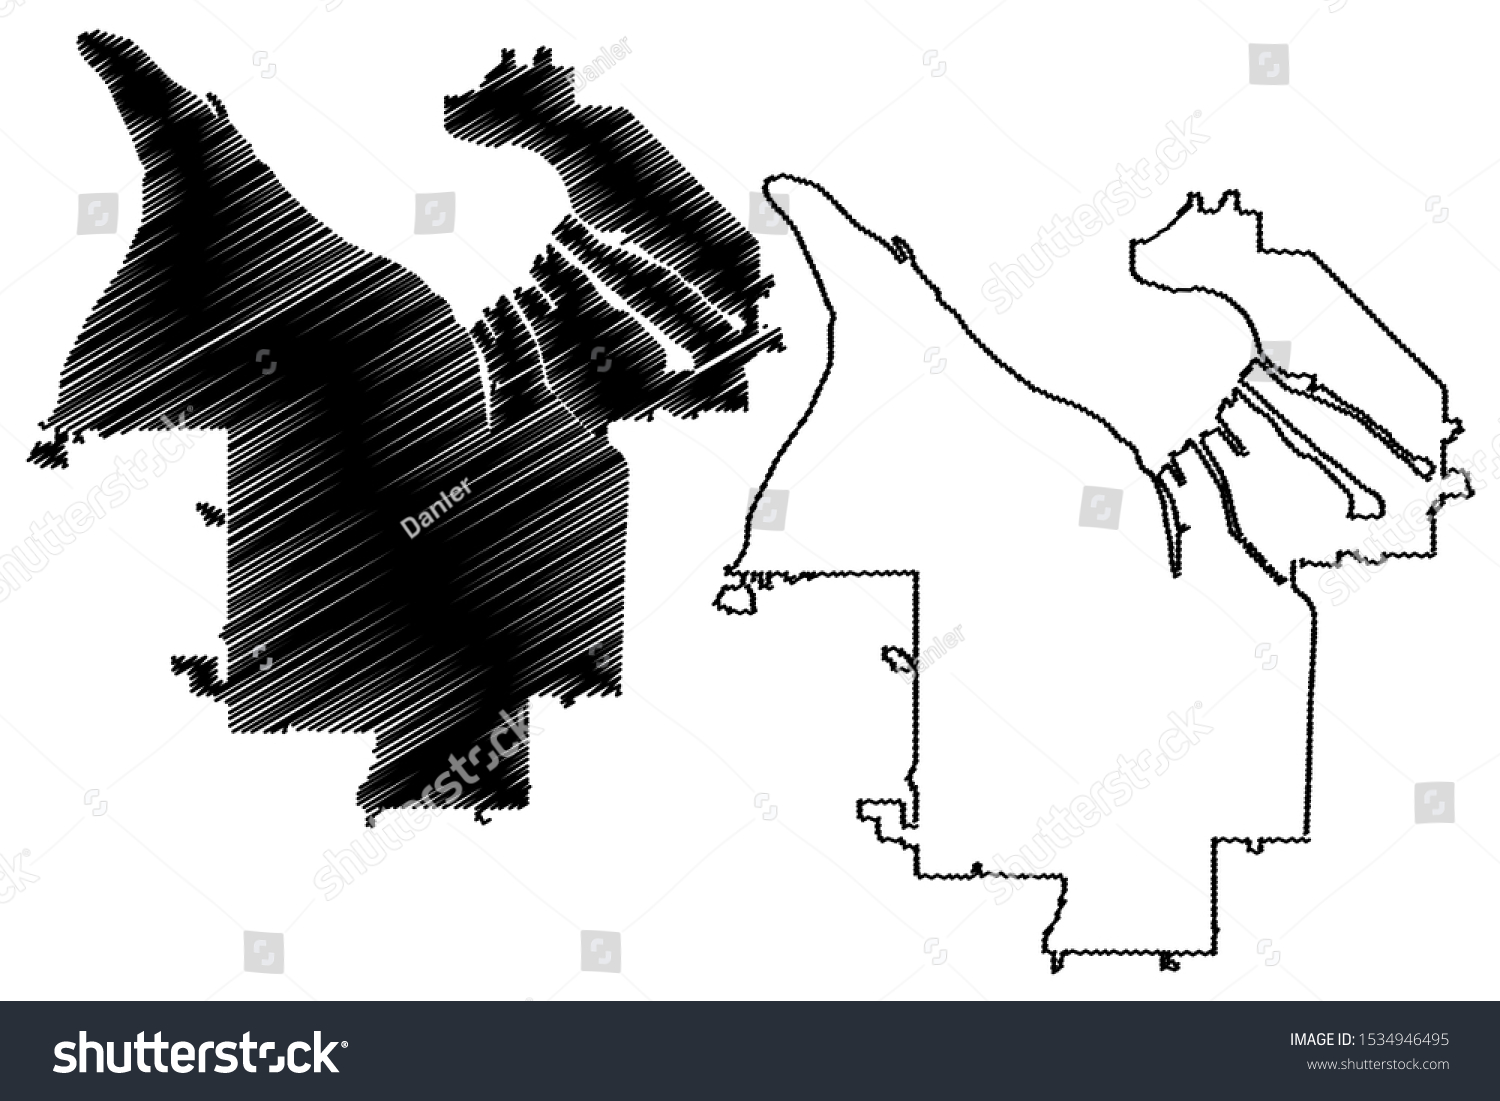 SVG of Tacoma City ( United States cities, United States of America, usa city) map vector illustration, scribble sketch City of Tacoma map svg